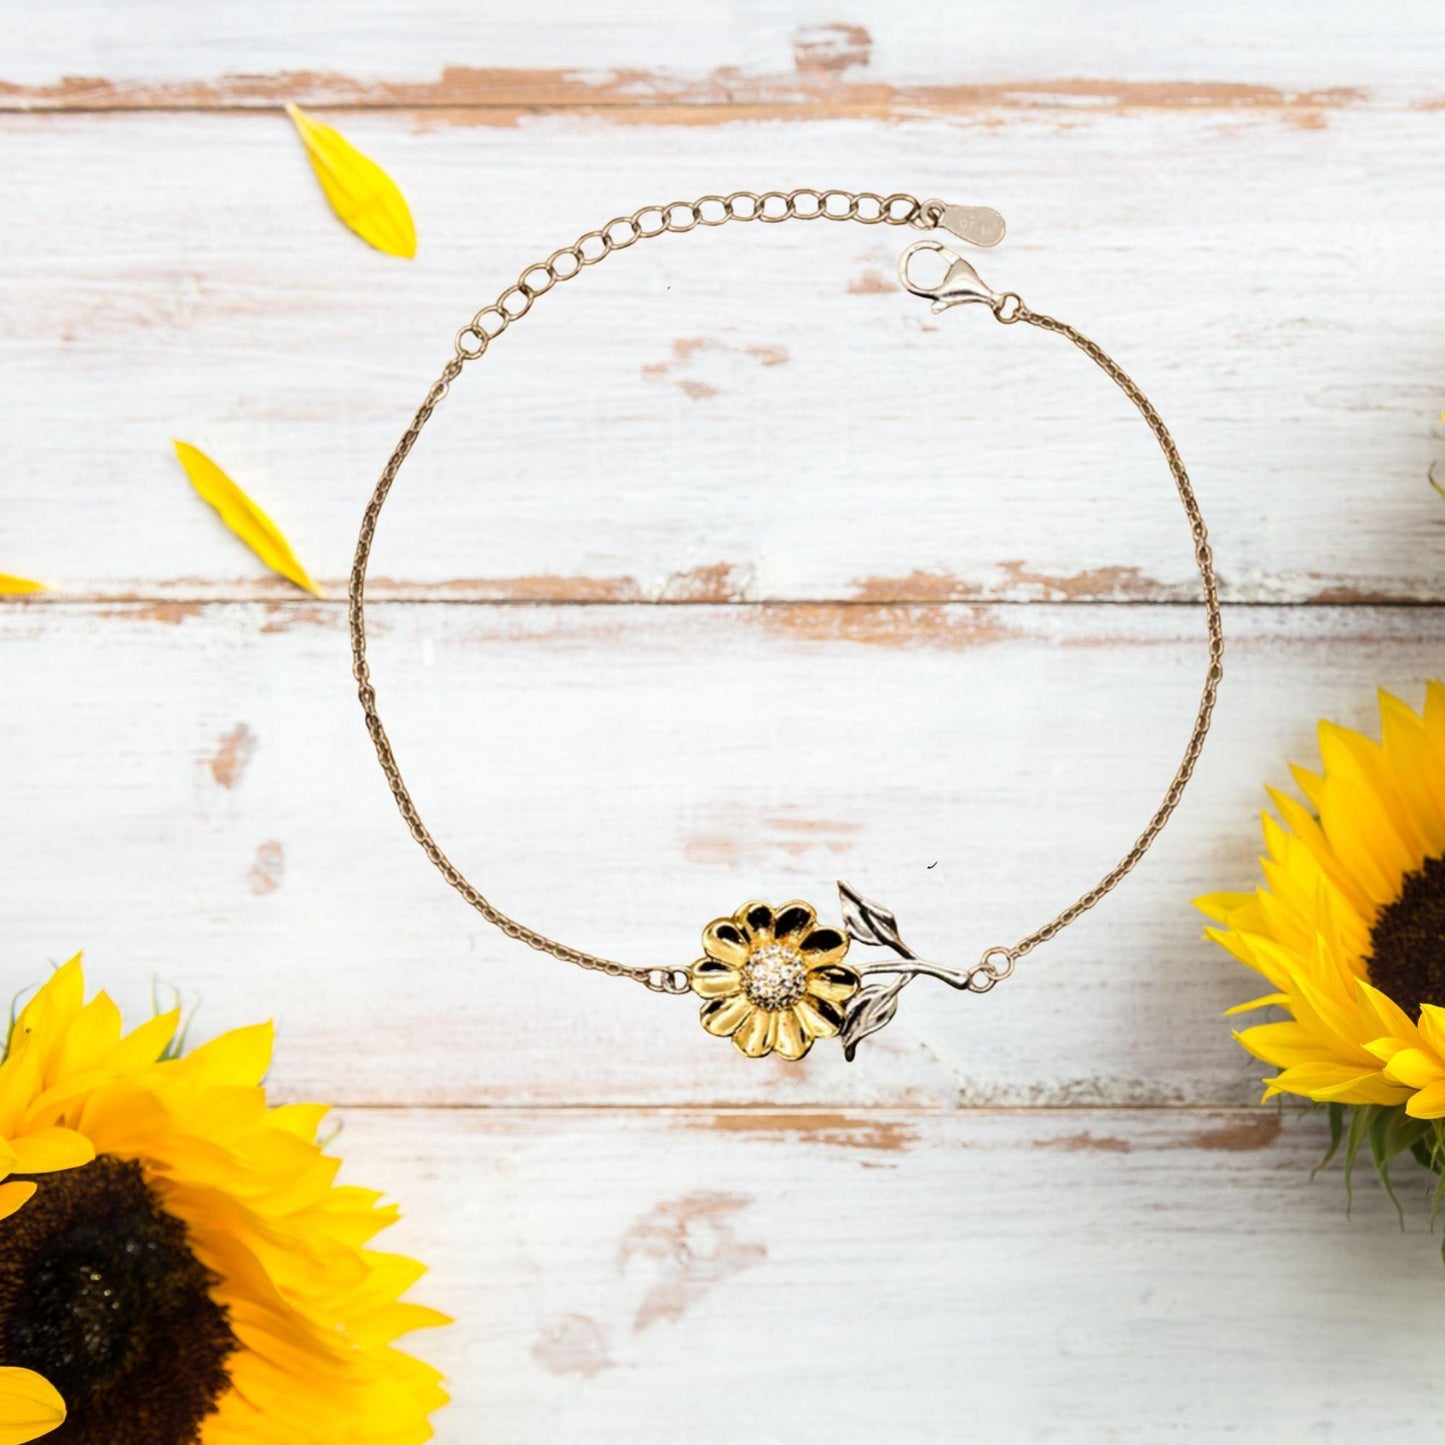 Sunflower Bracelet for Wife Present, Wife Always follow your dreams, never forget how amazing you are, Wife Birthday Christmas Gifts Jewelry for Girls Boys Teen Men Women - Mallard Moon Gift Shop